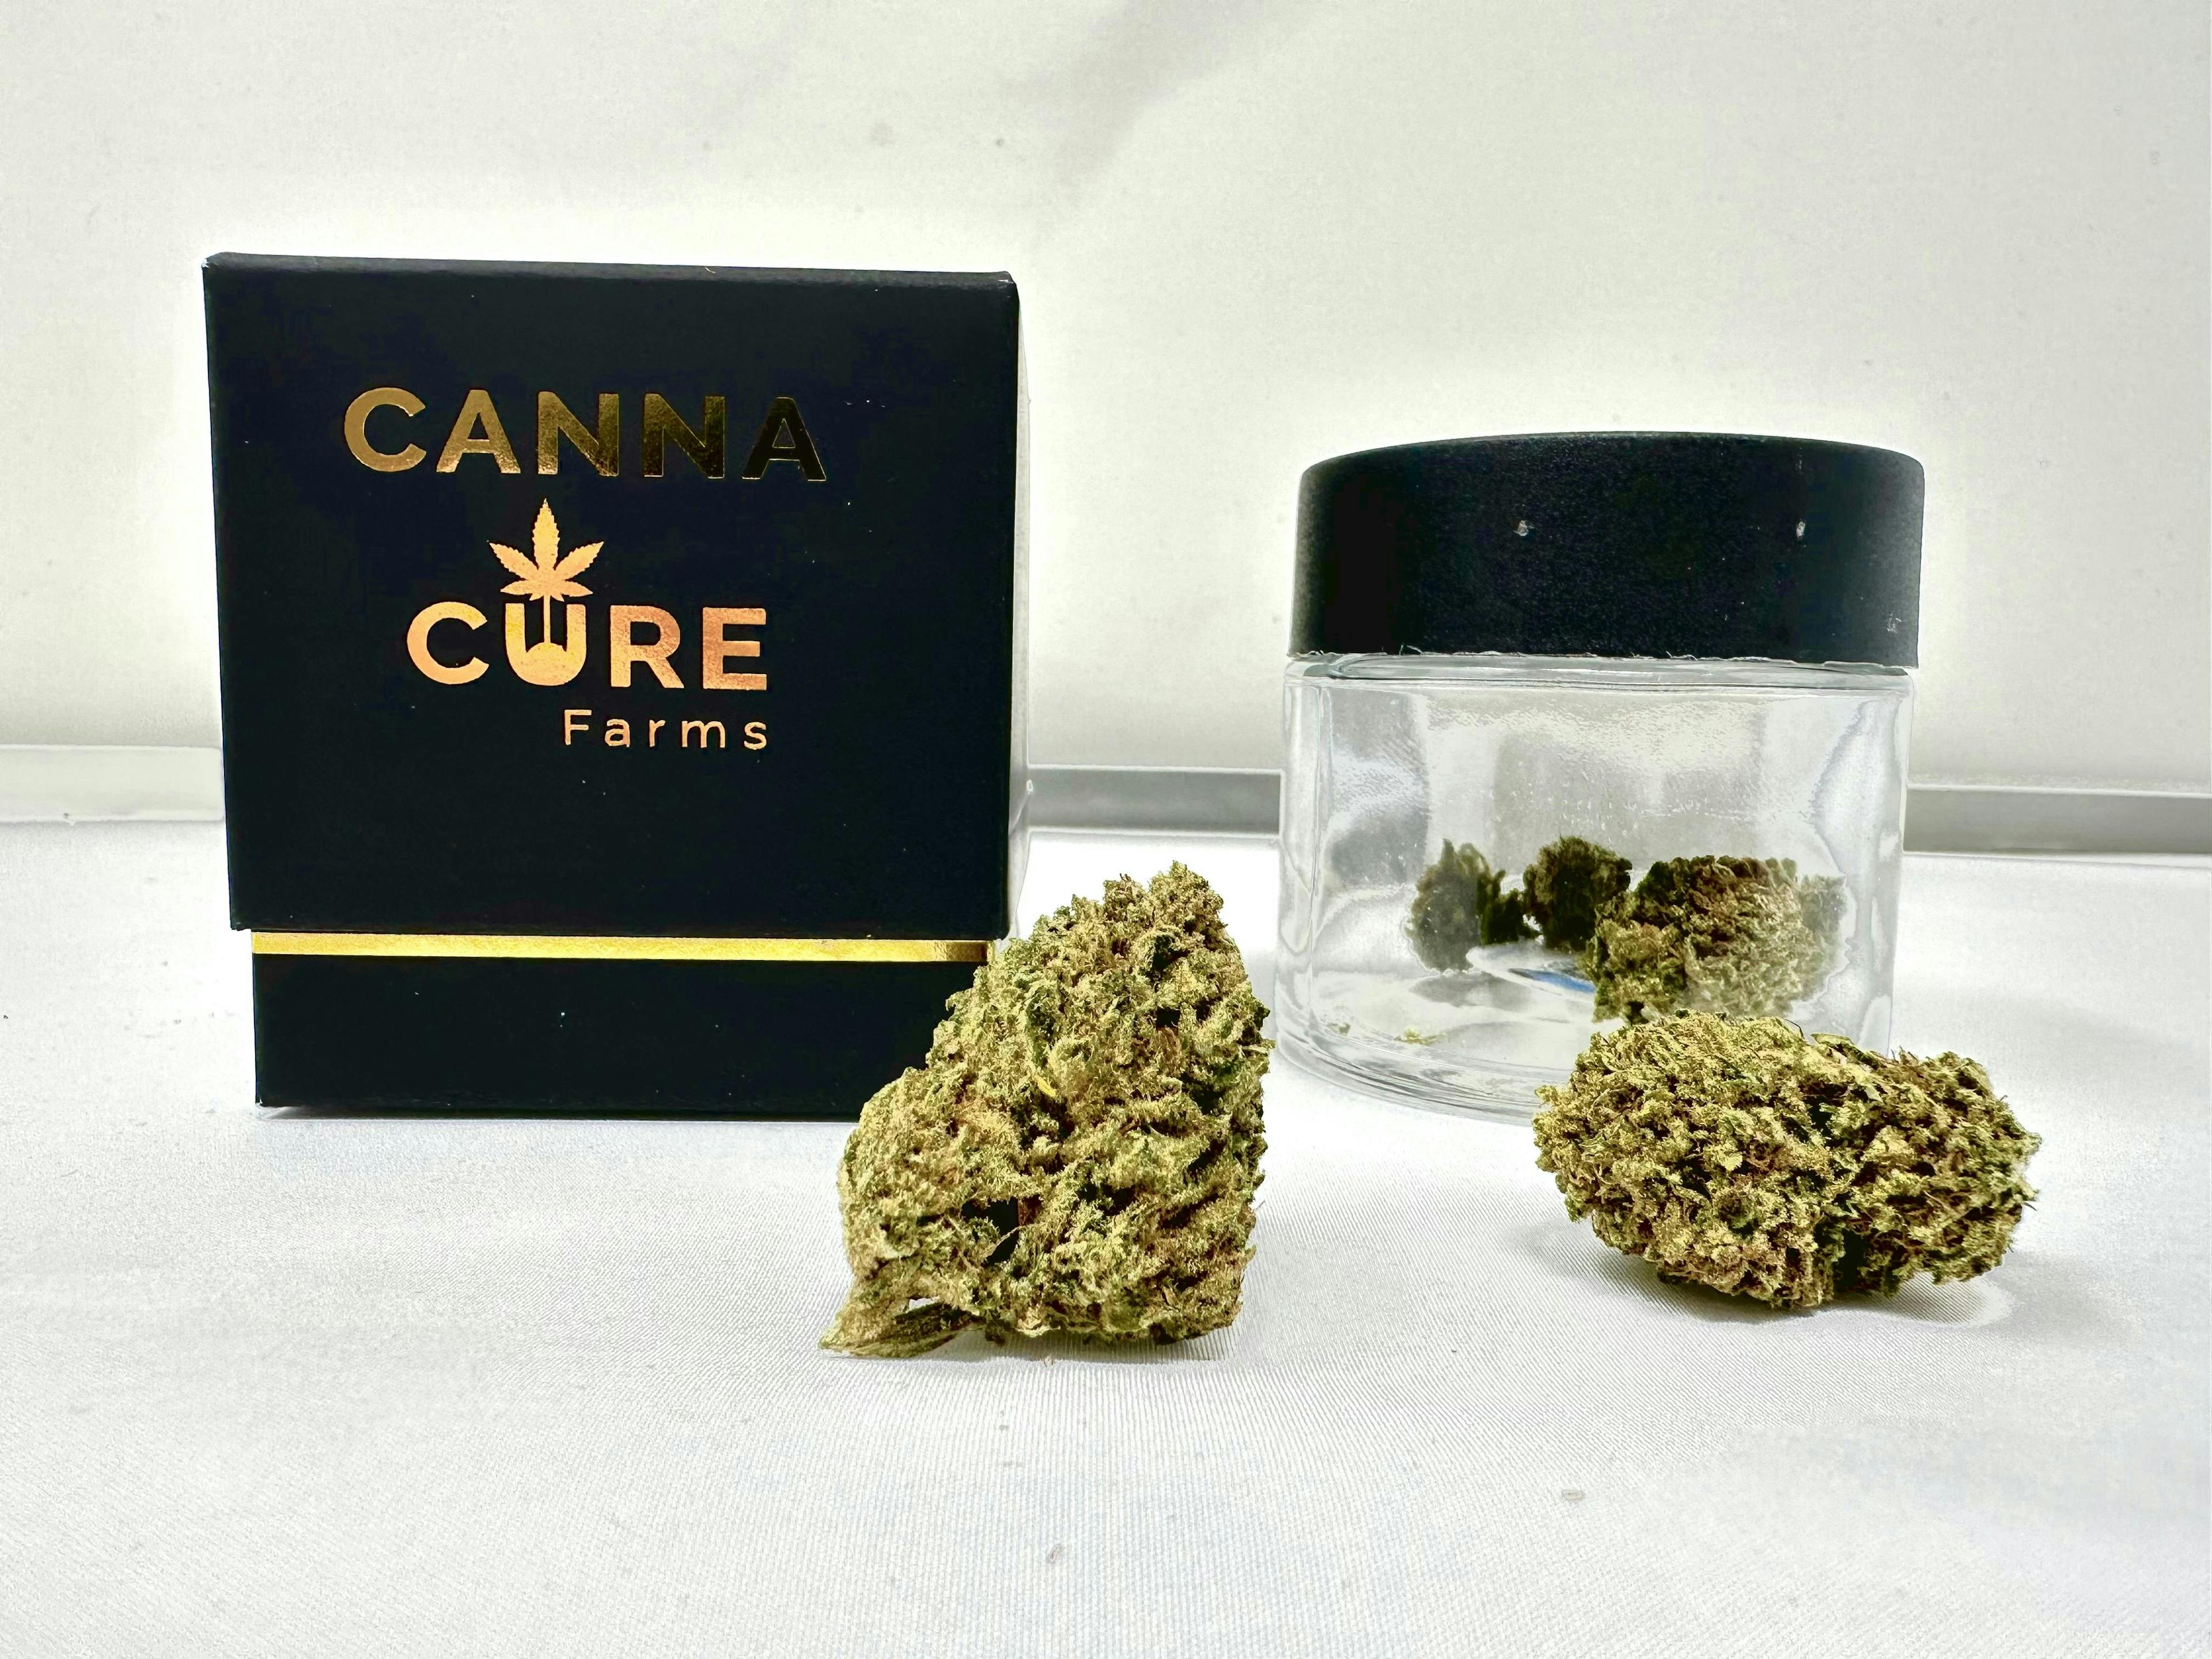 Blue Dream • 3.5g - CANNA-CURE | Treehouse Cannabis - Weed delivery for New York